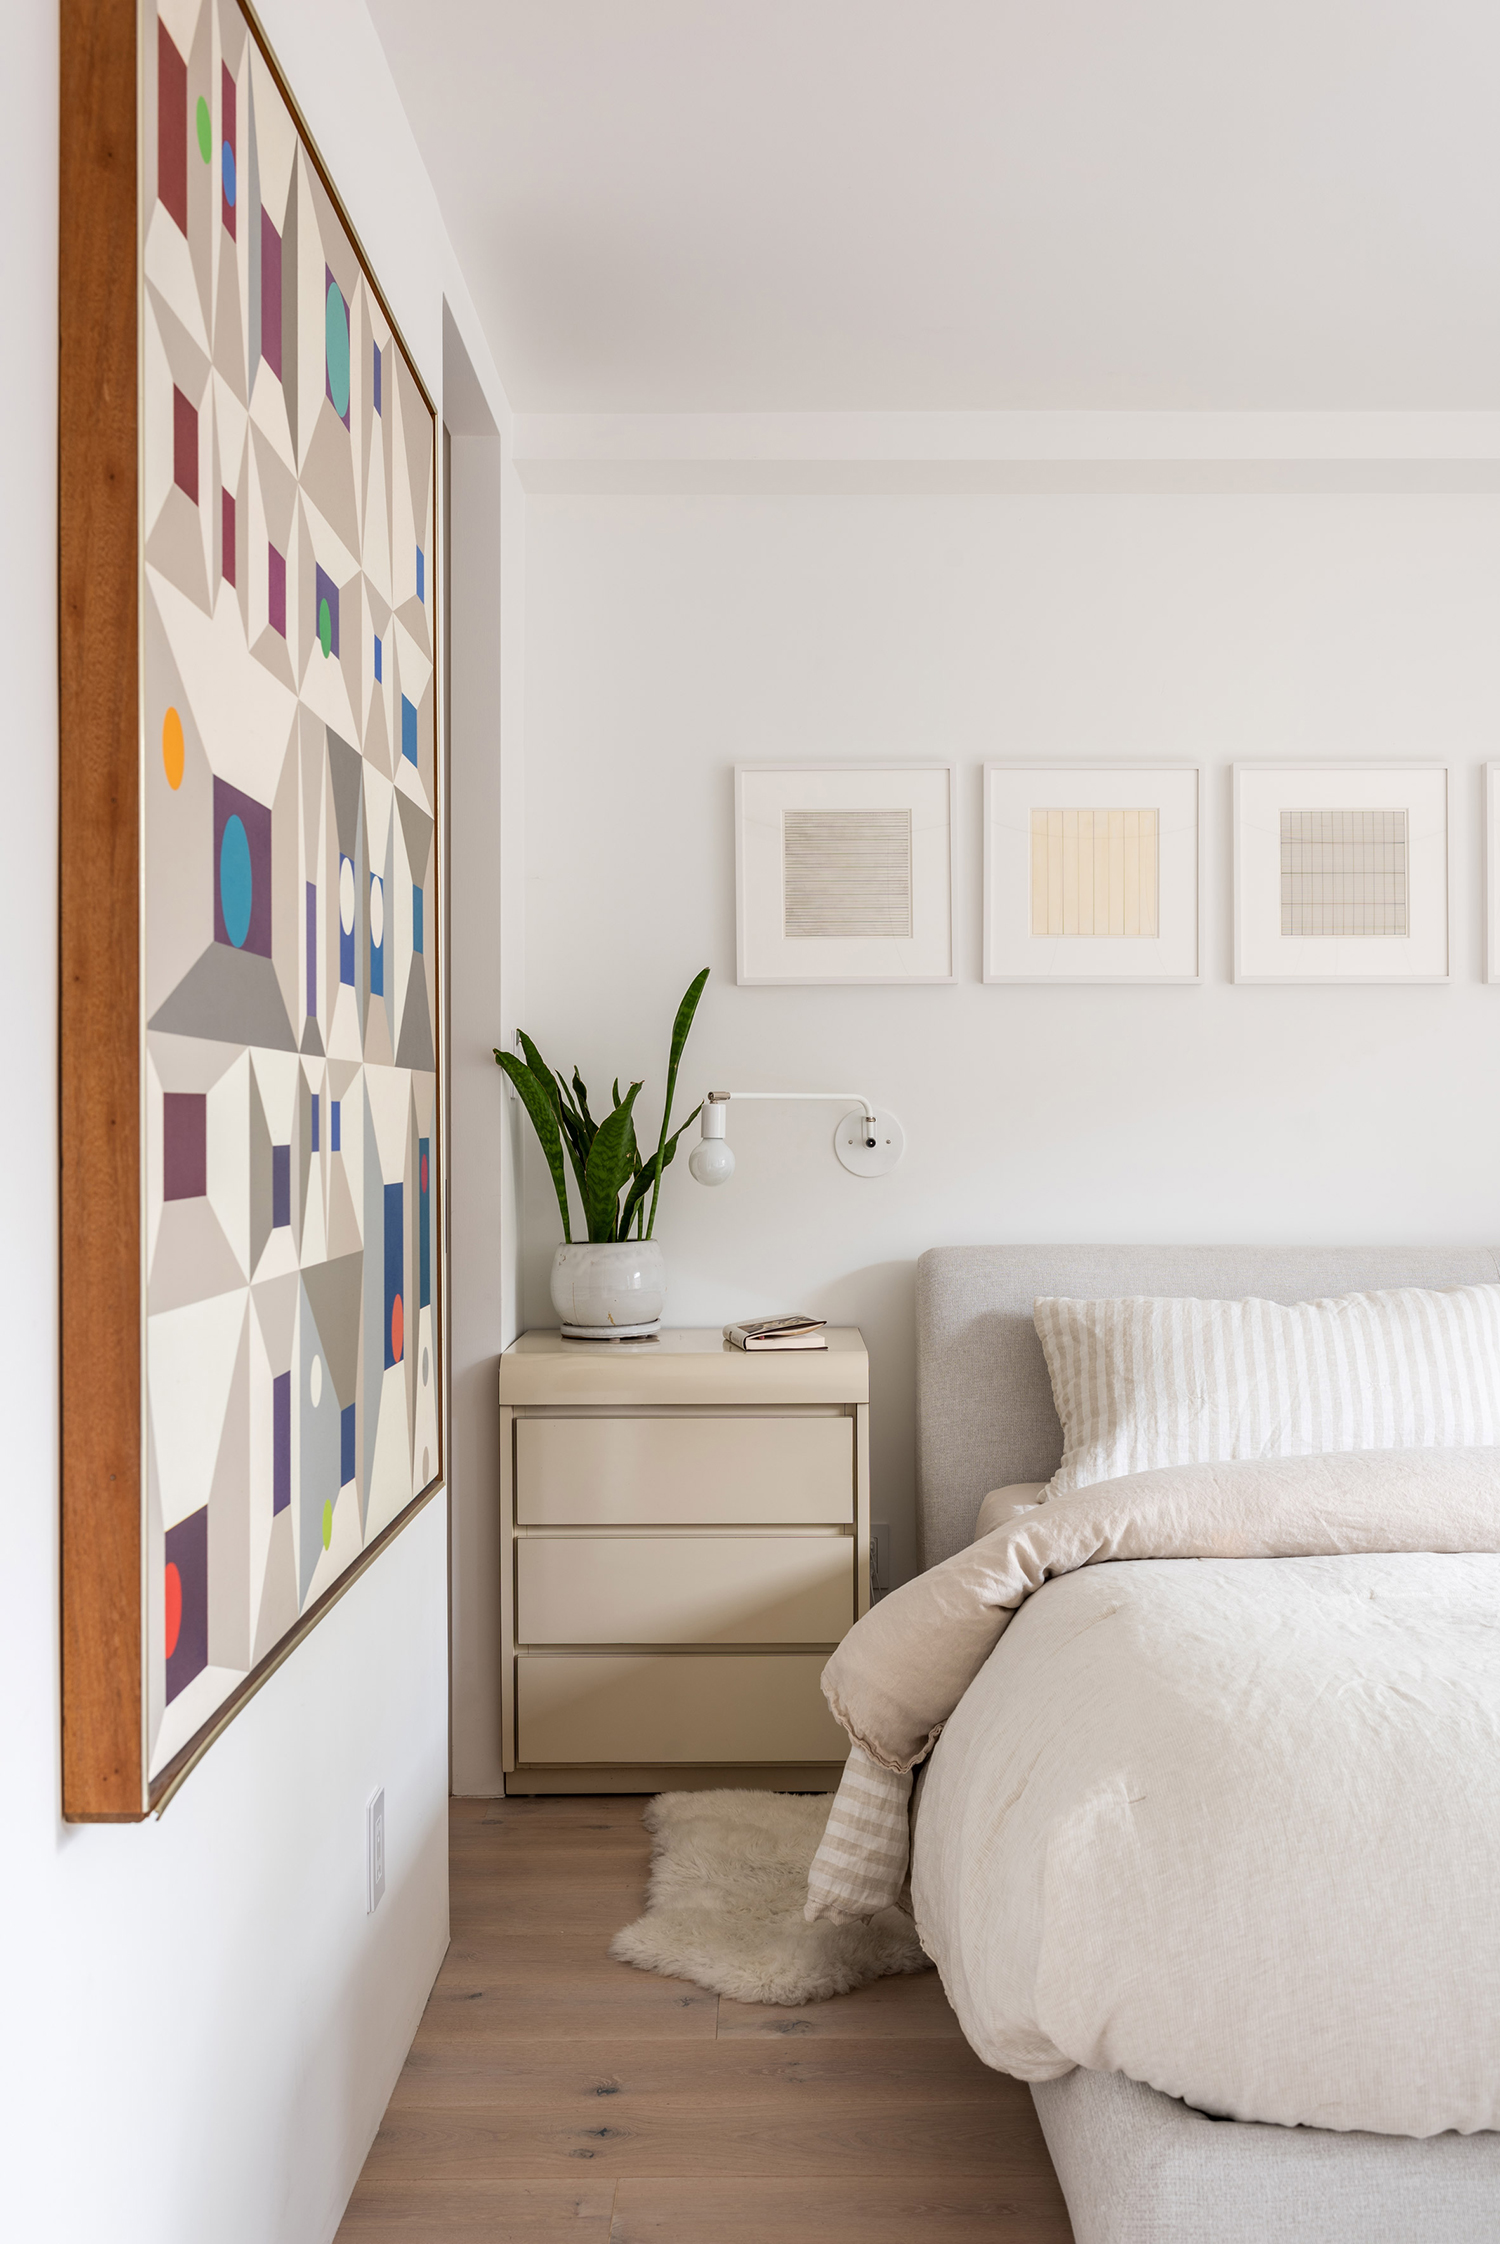 Foolproof Tips For Choosing The Right Artwork For Your Home